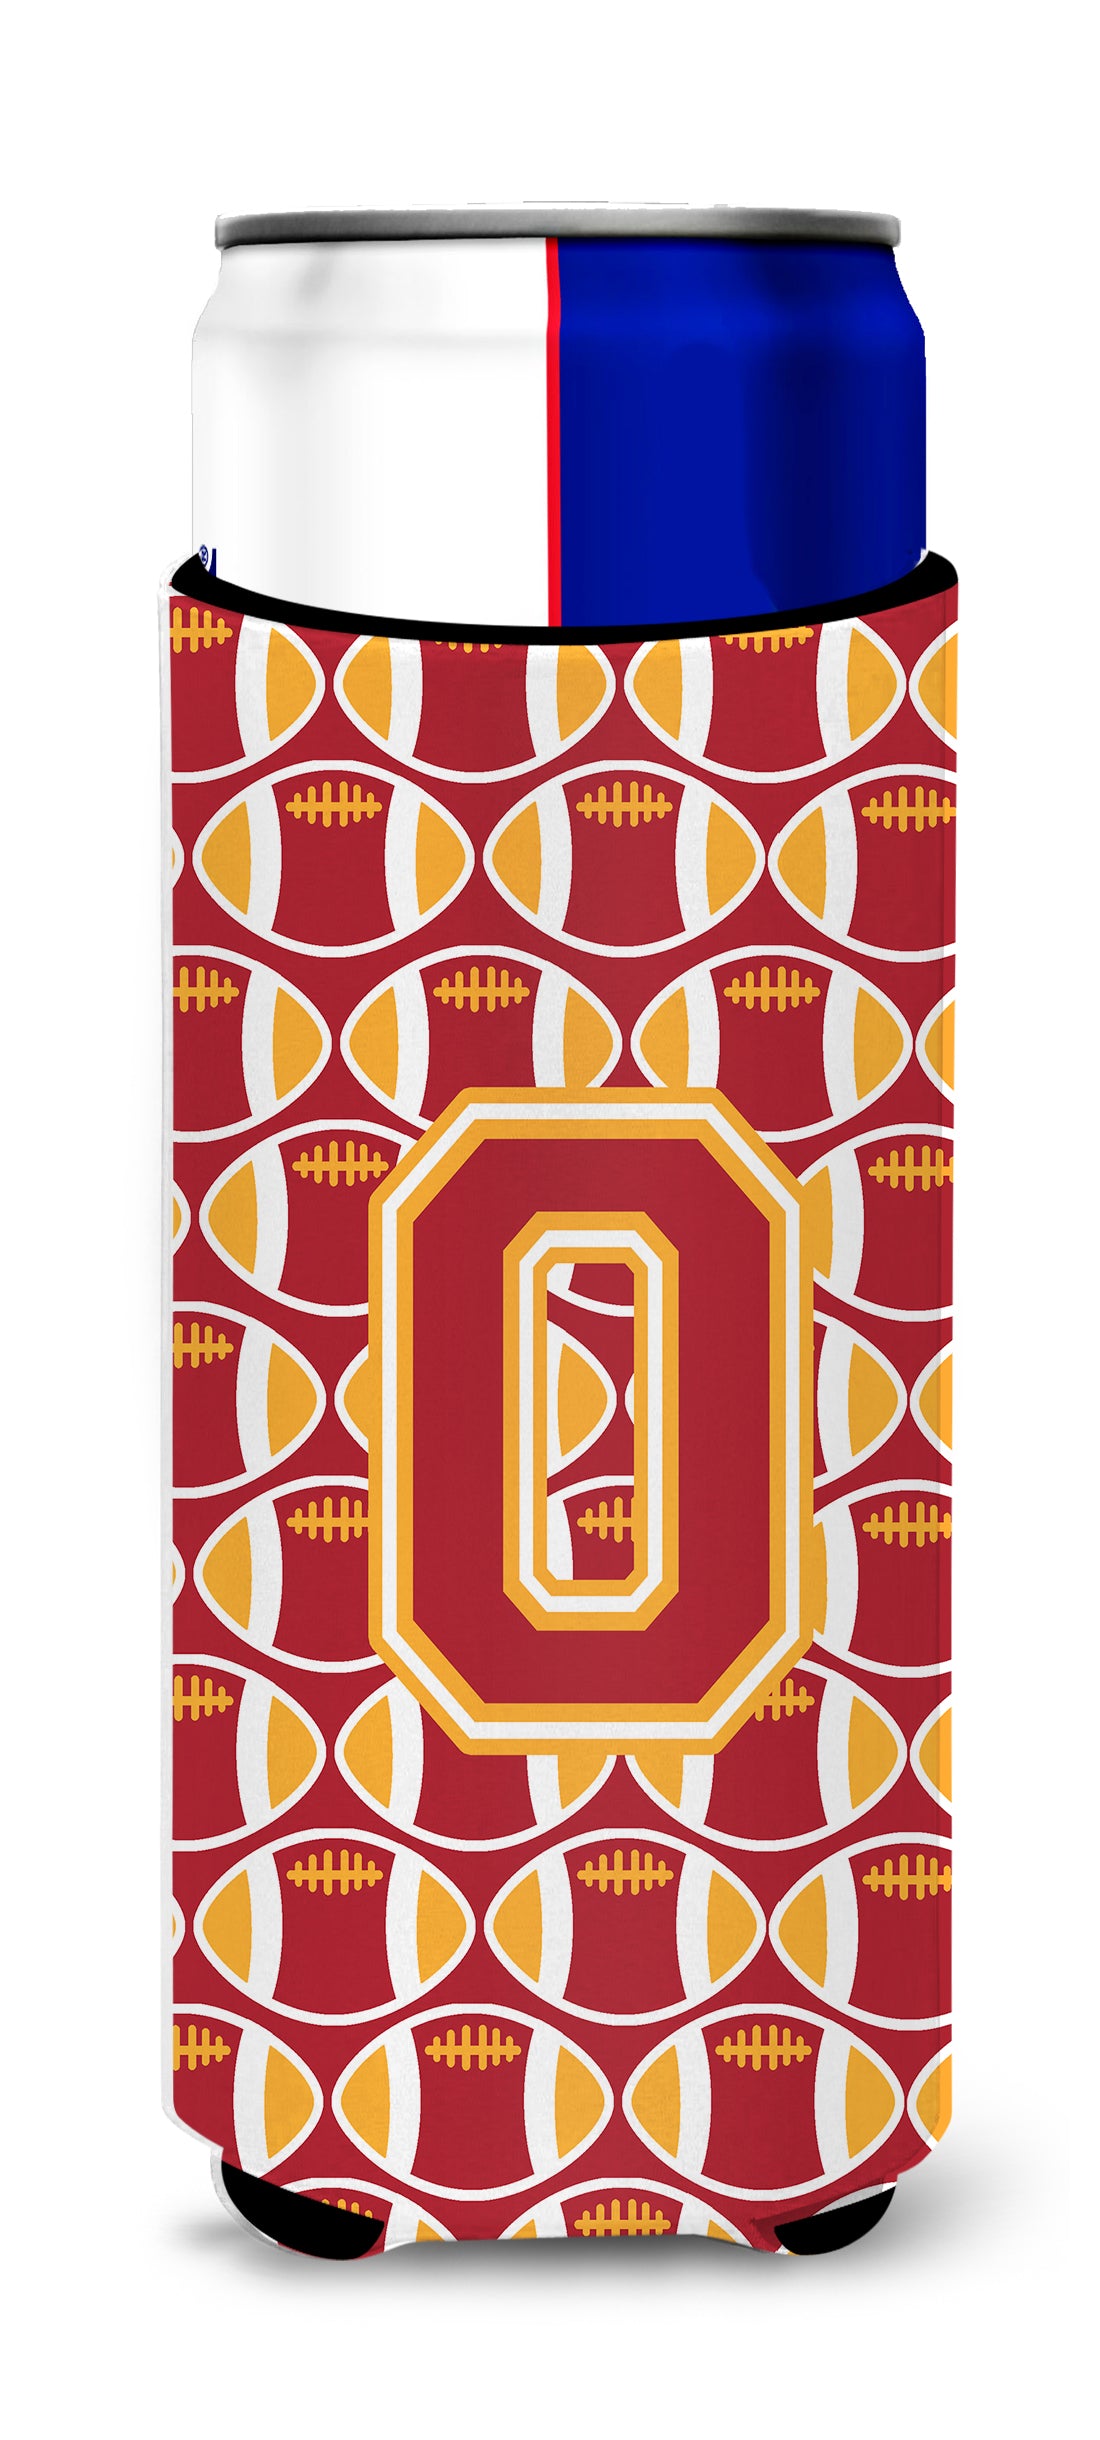 Letter O Football Cardinal and Gold Ultra Beverage Insulators for slim cans CJ1070-OMUK